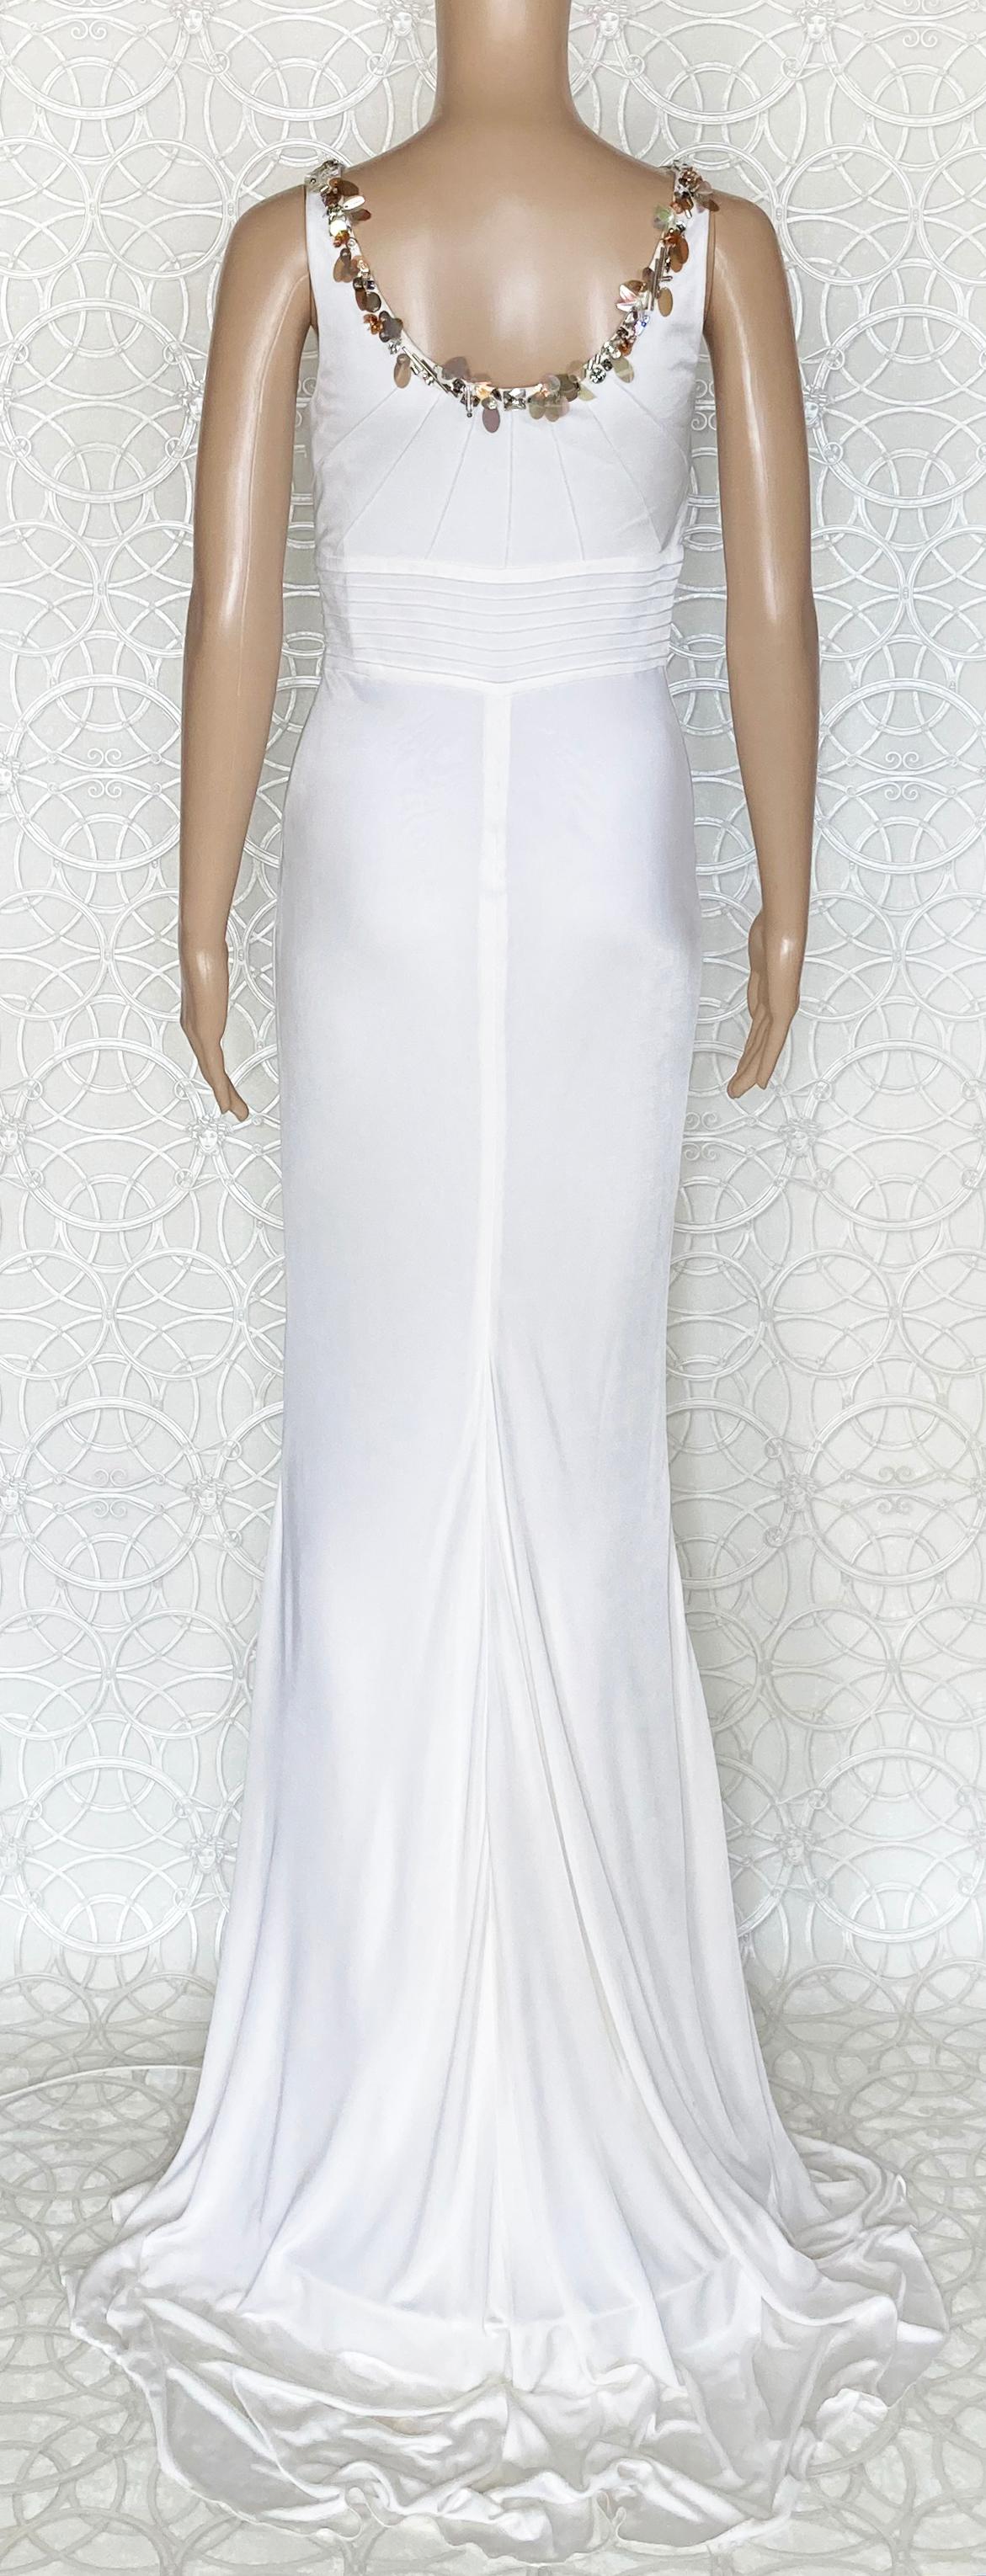 NEW VERSACE CRYSTAL EMBELLISHED WHITE LONG DRESS Gown  42 - 6 For Sale 5